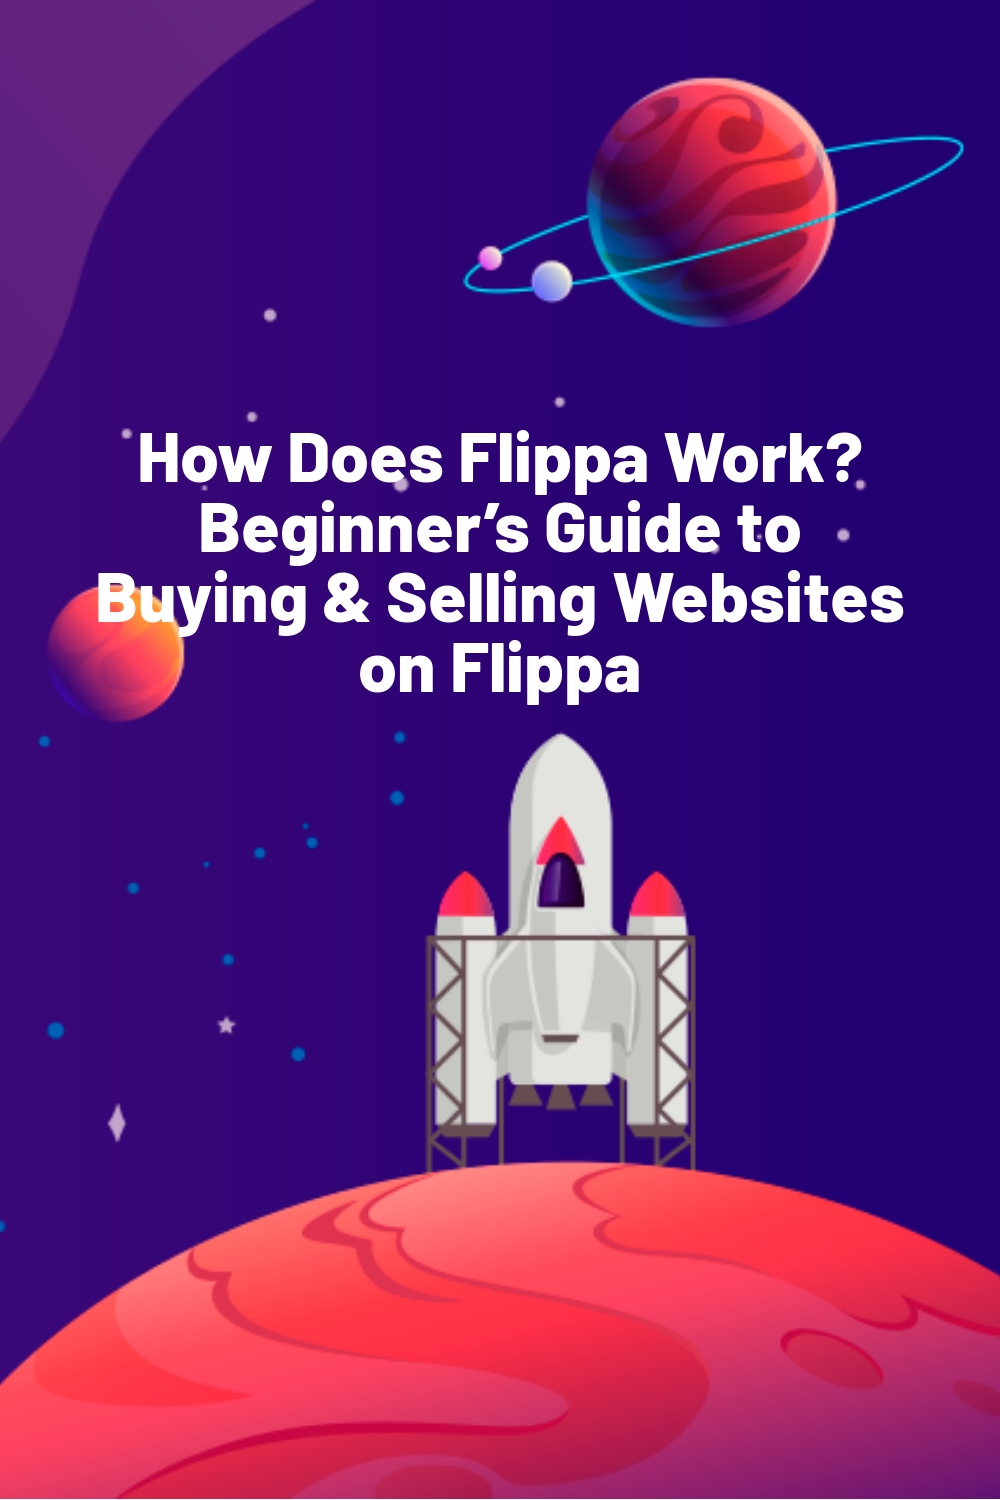 How Does Flippa Work? Beginner’s Guide to Buying & Selling Websites on Flippa